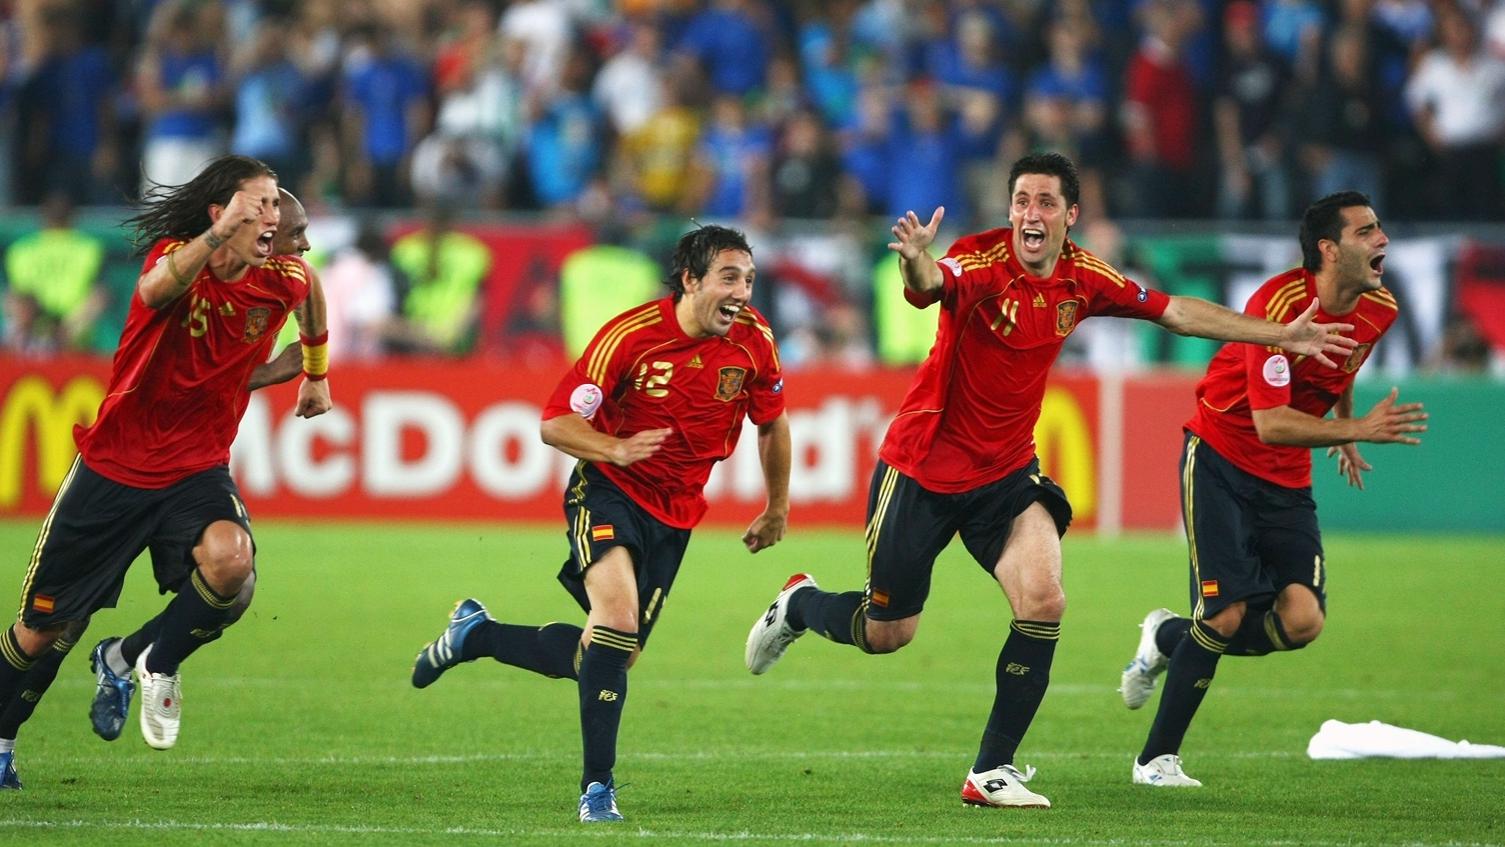 Spain-Italy | Casillas&#39;s saves in Italy shoot-out put Spain in EURO 2008 semis | UEFA EURO 2020 | UEFA.com